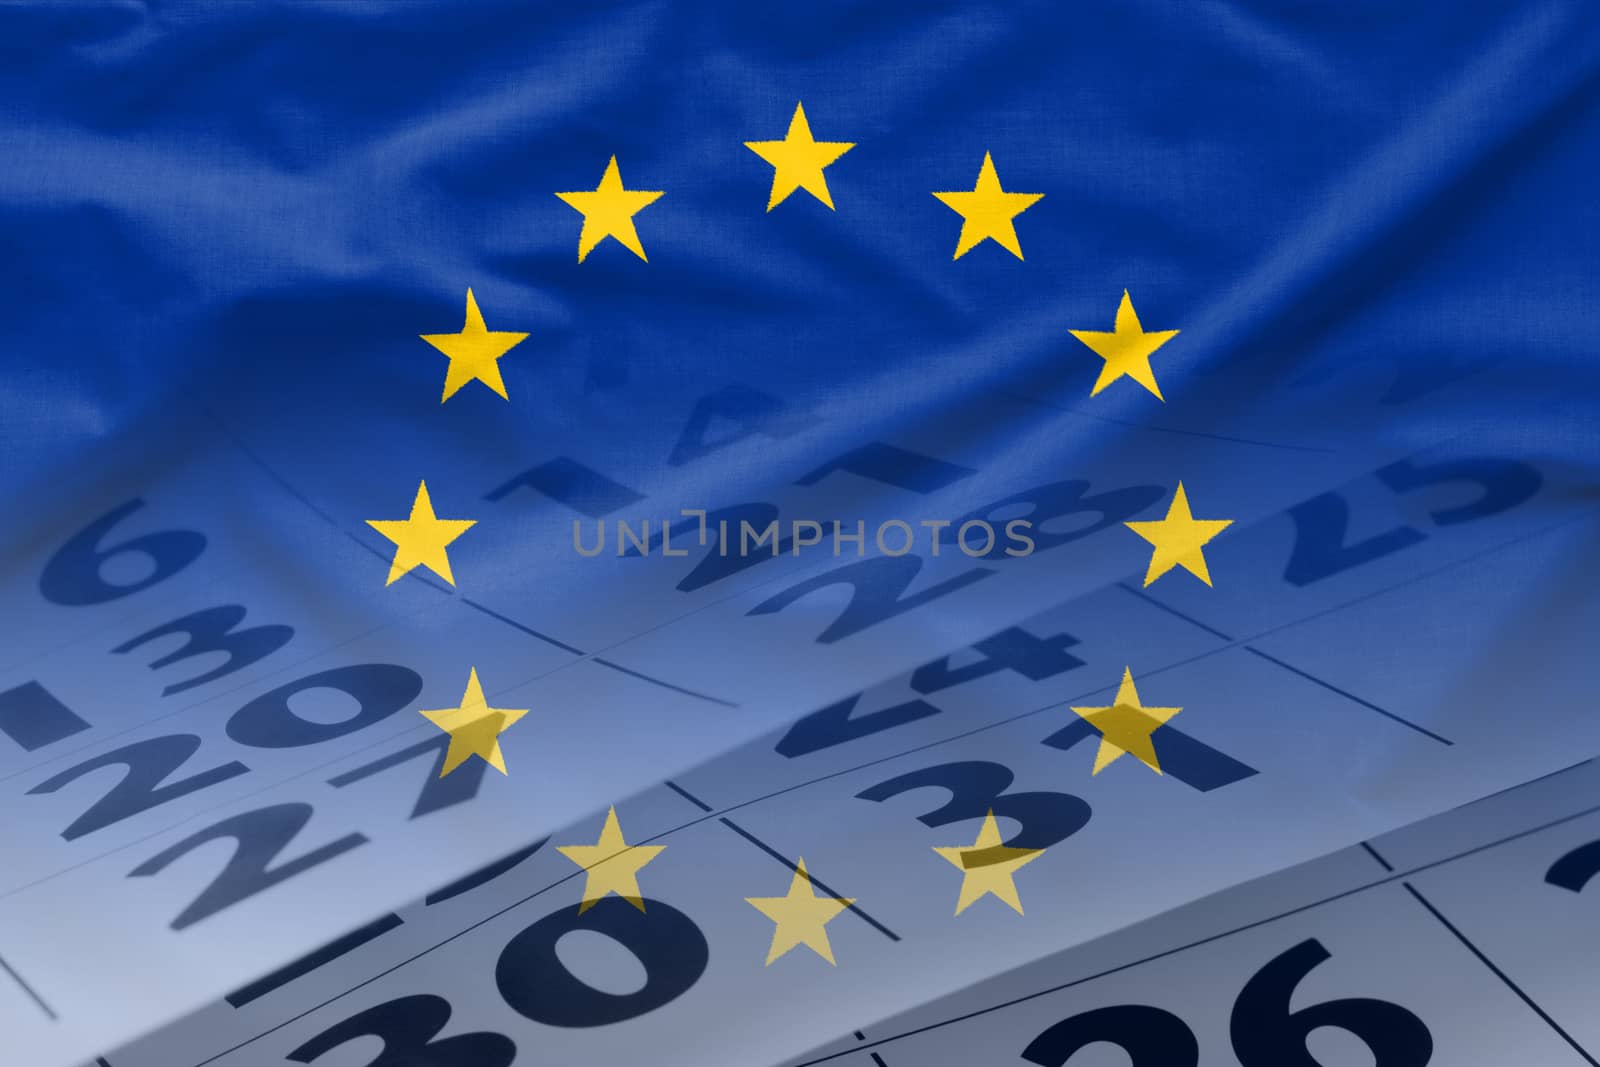 The flag of European Union with calendar of the month in the background. Full frame concept of political event date reminder